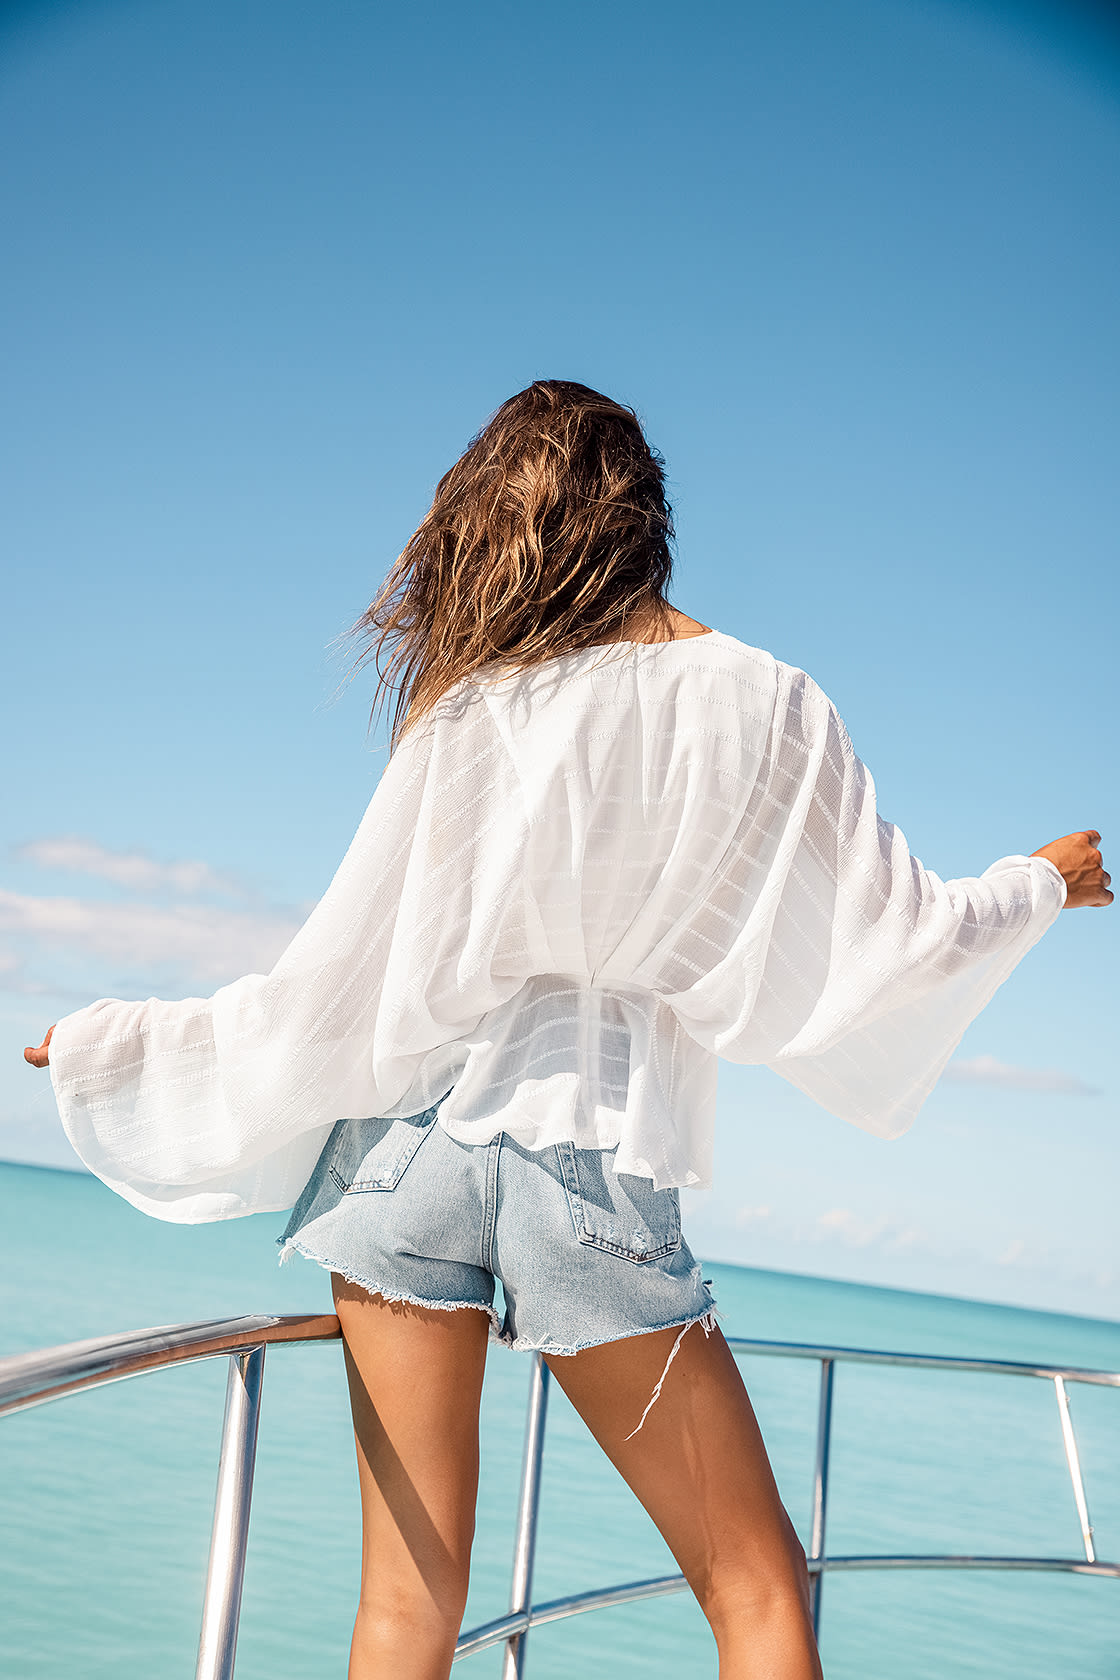 Jean Shorts with Flowy White Blouse for Summer Vacation Outfit